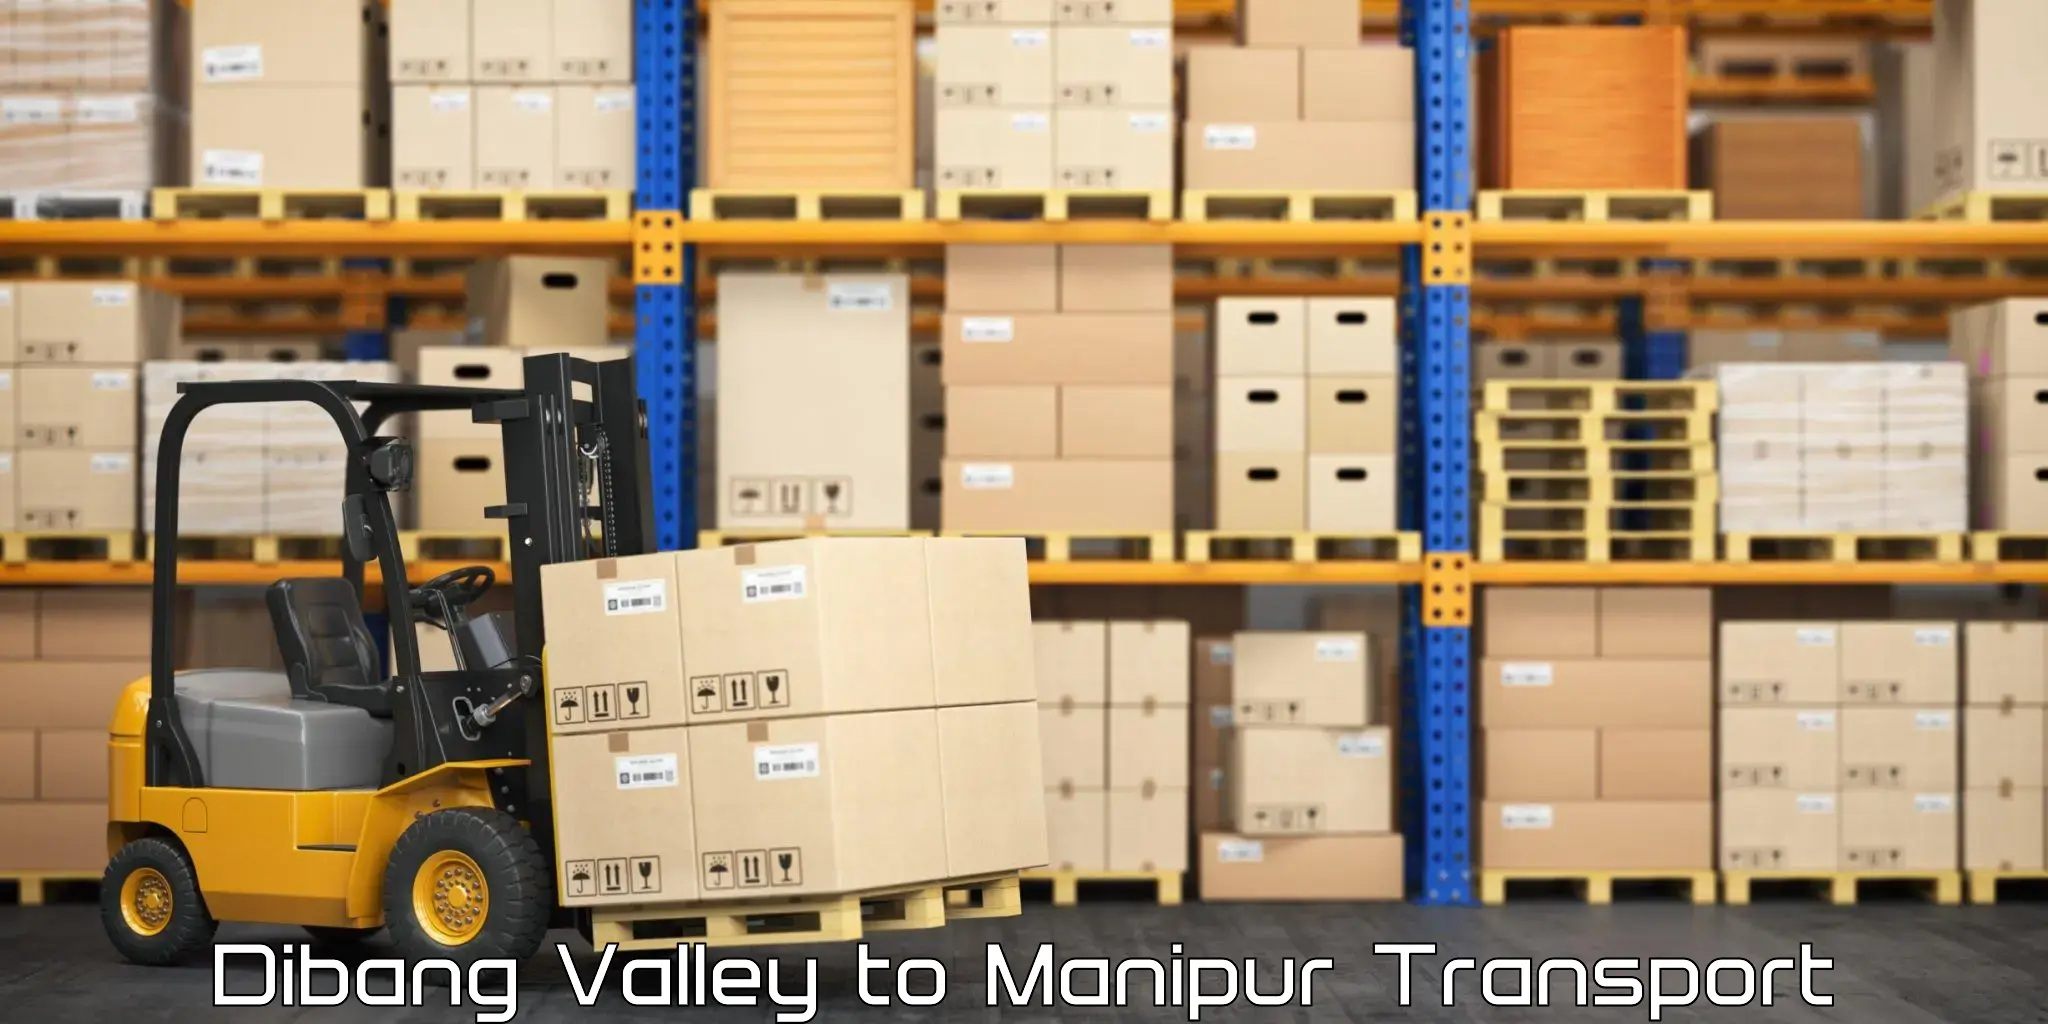 Container transport service Dibang Valley to Manipur